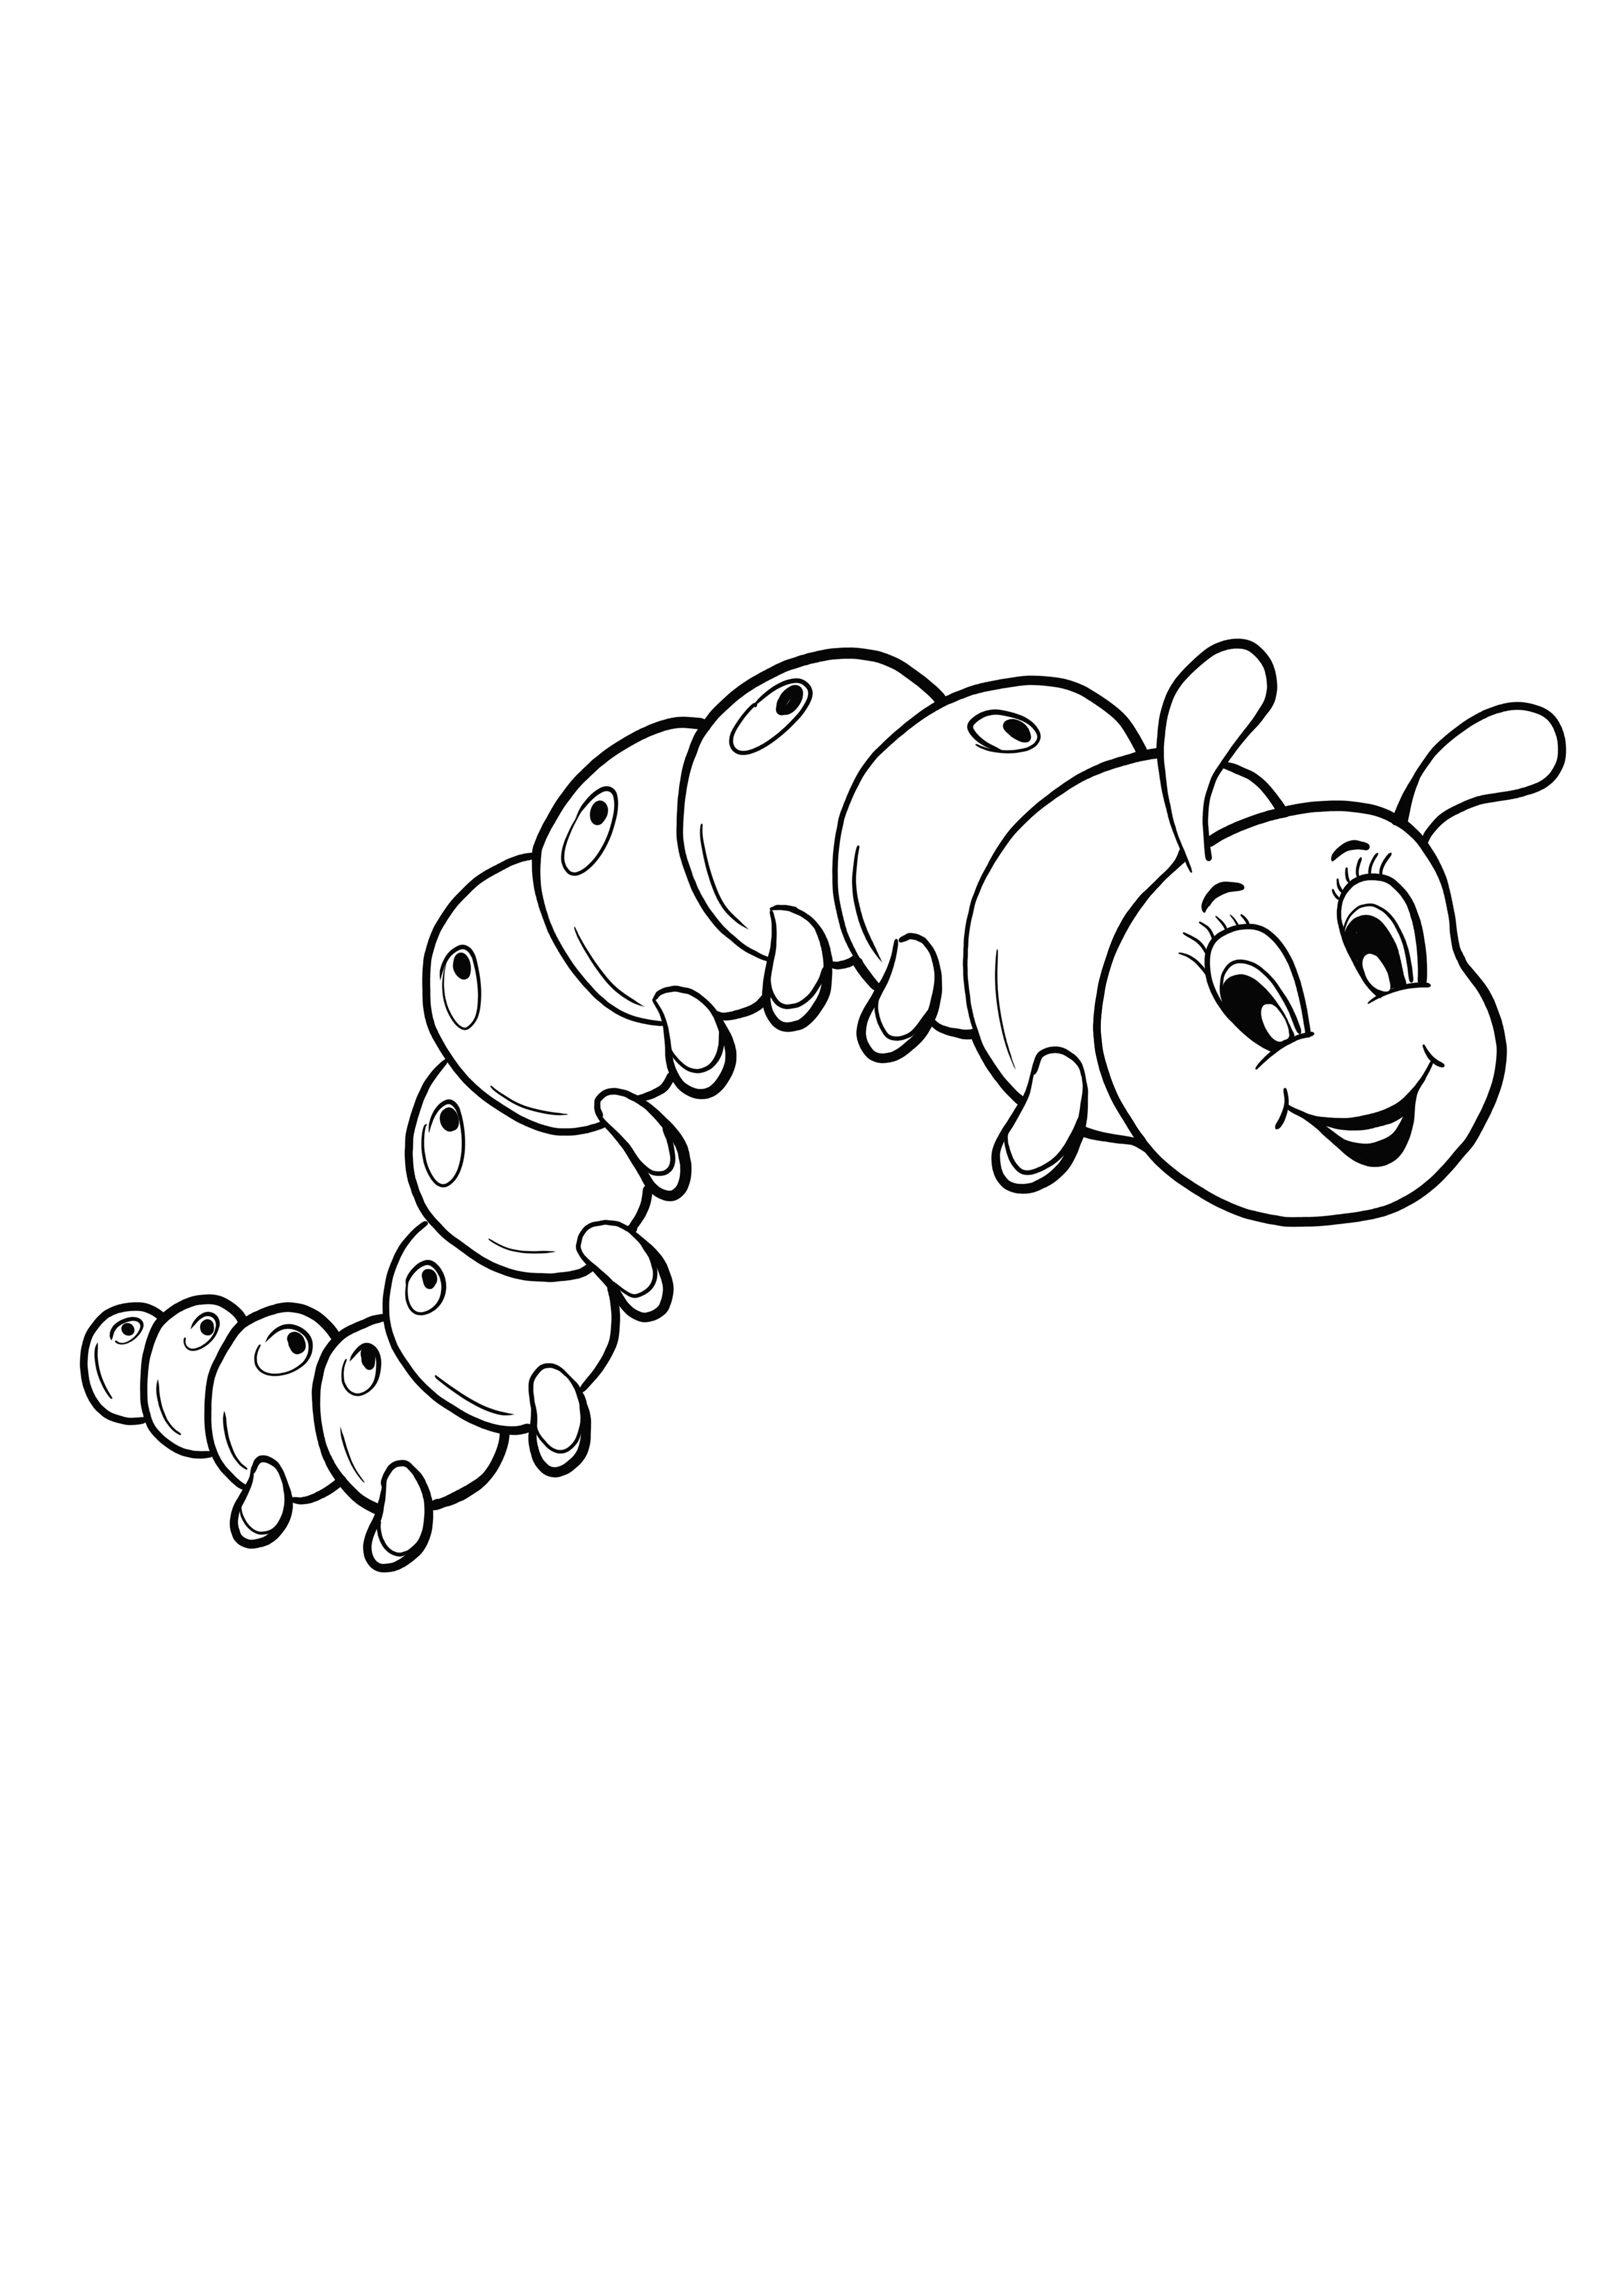 easy caterpillar free printing and coloring page